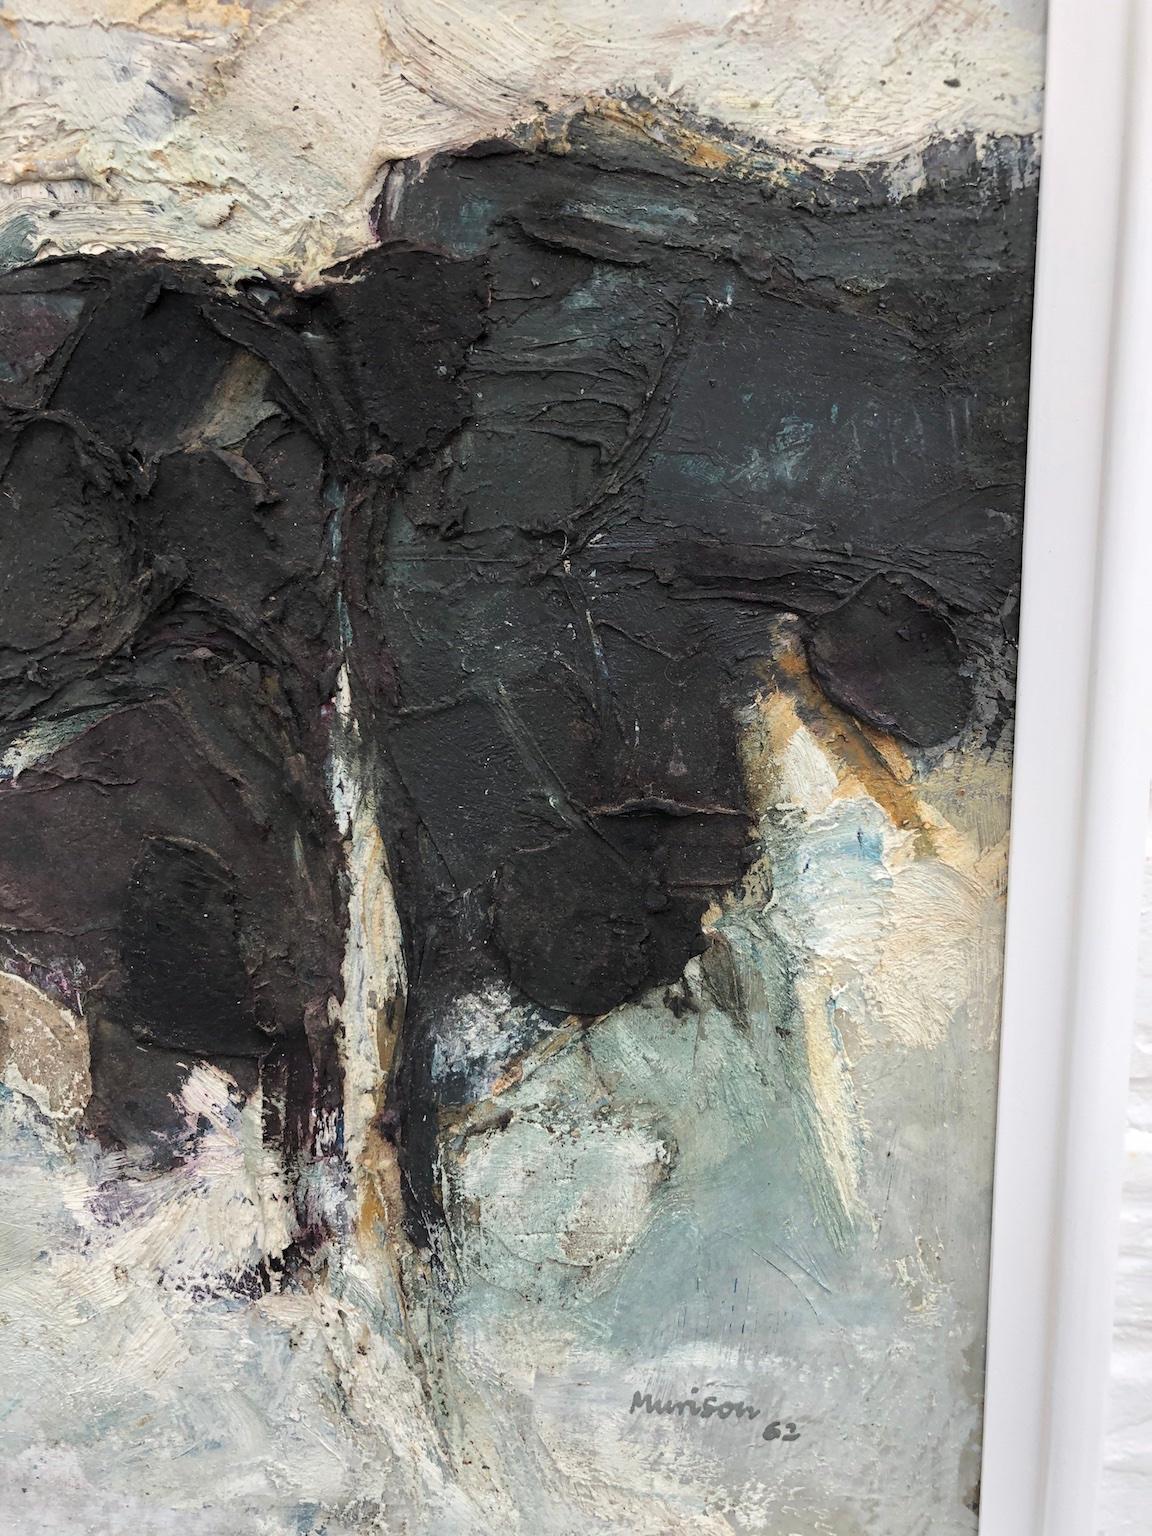 British Mid Century Modern Painting by Neil Murison, Oil on Board, Abstract, 1962